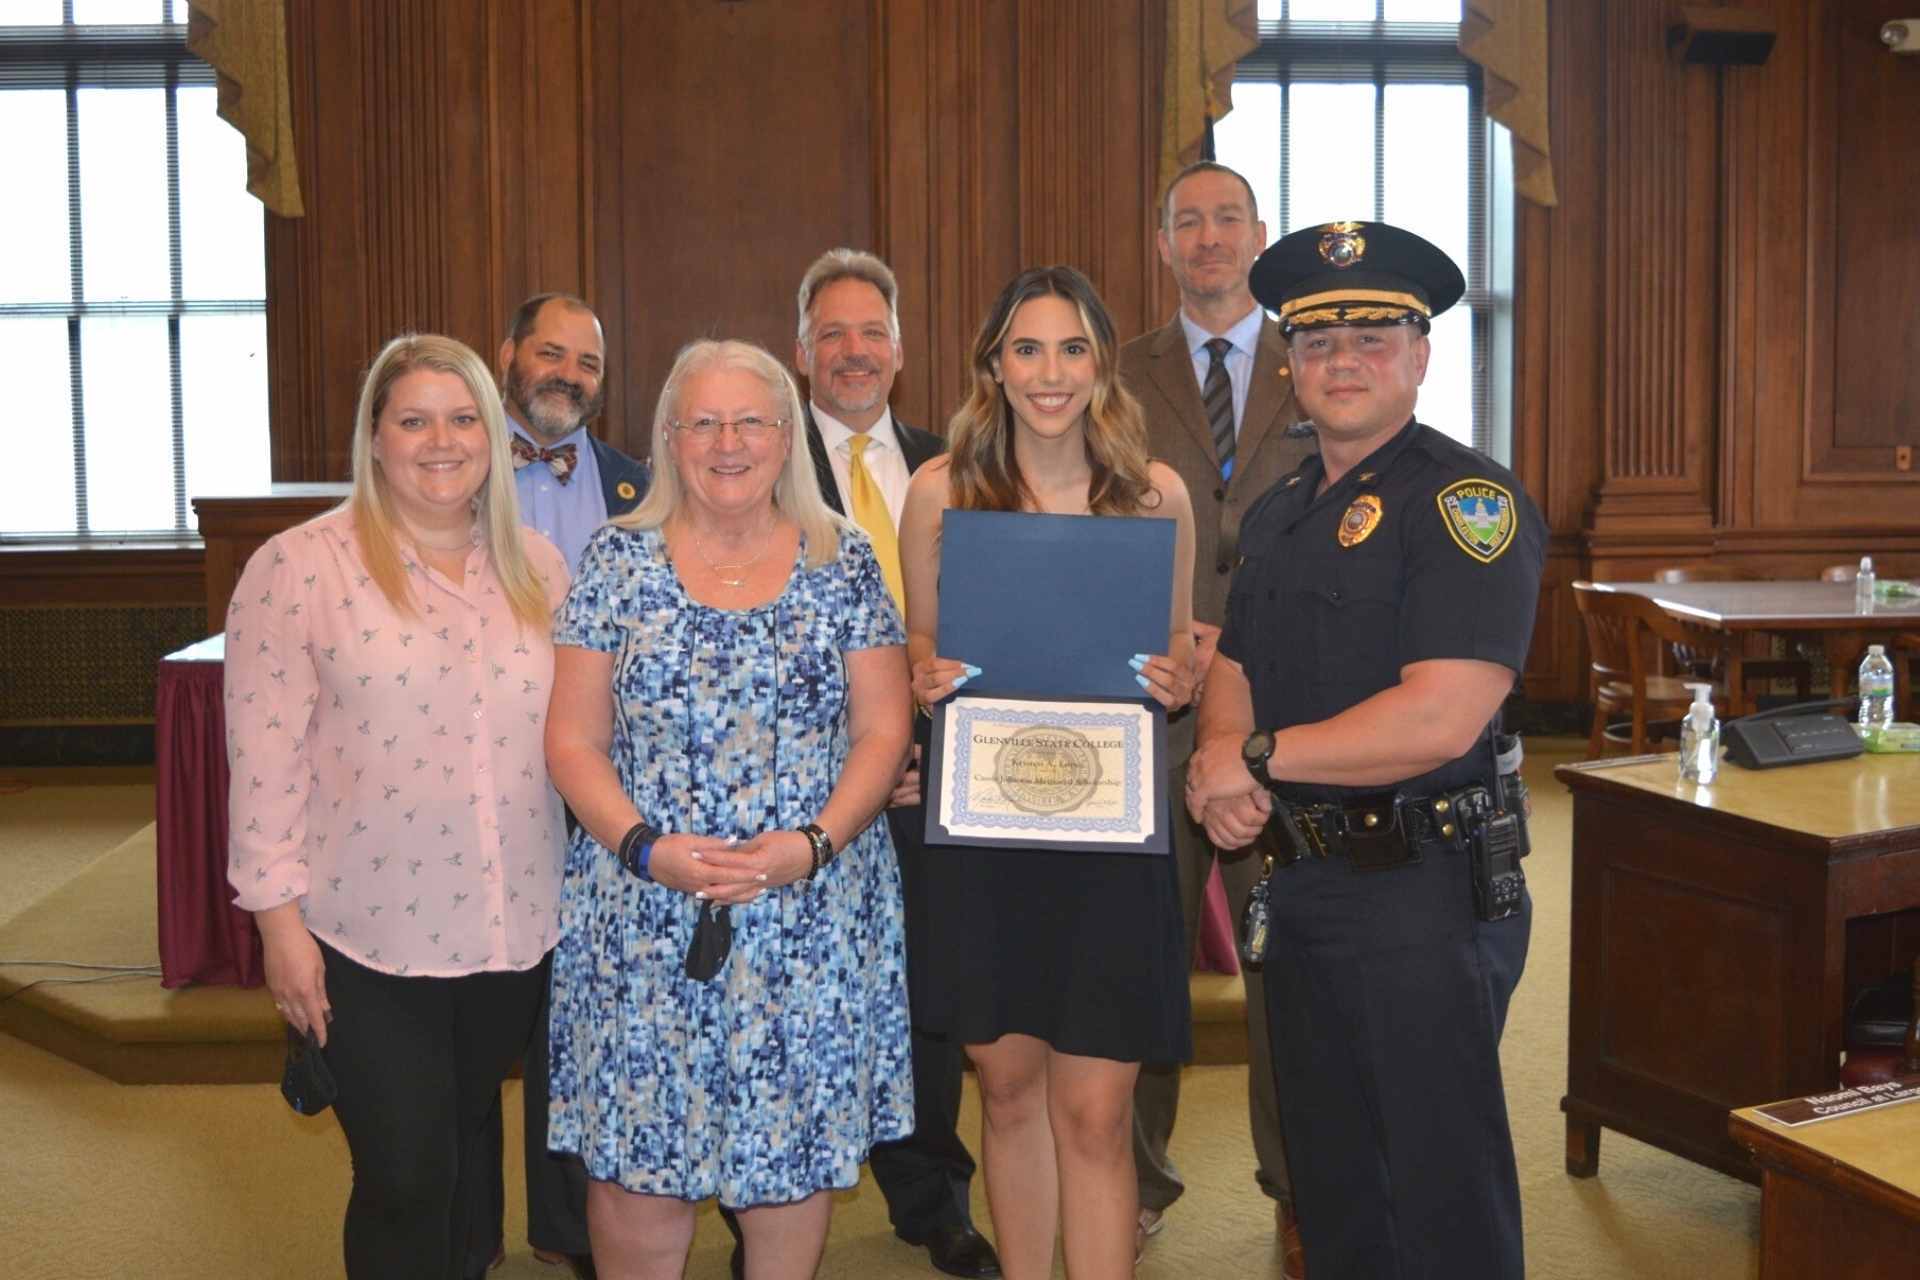 Members of the late Charleston Police Officer Cassie Johnson’s family joined Glenville State College faculty members and CPD Chief Tyke Hunt in presenting the first Cassie Johnson Memorial Scholarship to GSC student Kristen Lopez. Pictured are (l-r) Chelsea Johnson, Dr. Jeff Bryson, Sheryl Johnson, Dr. Ken Lang, Kristen Lopez, Dr. Donal Hardin, and Sgt. Tyke Hunt.